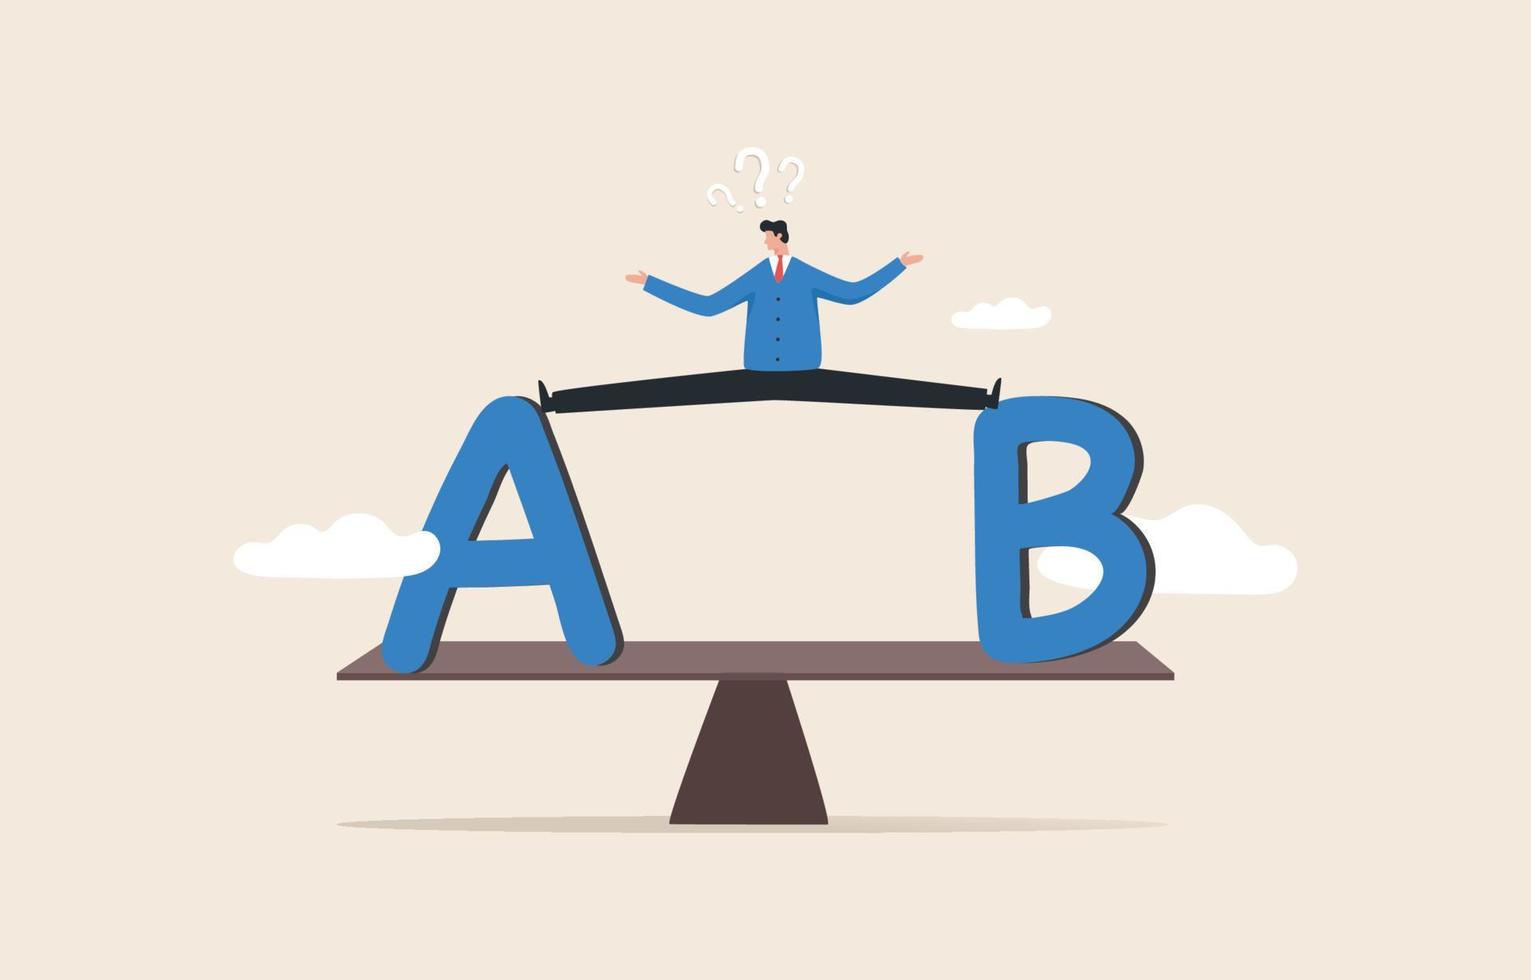 Choice A or B . Choice decision making as two path options. Think carefully for the best choice.Business with two options to choose between A or B on Wooden Seesaw. vector